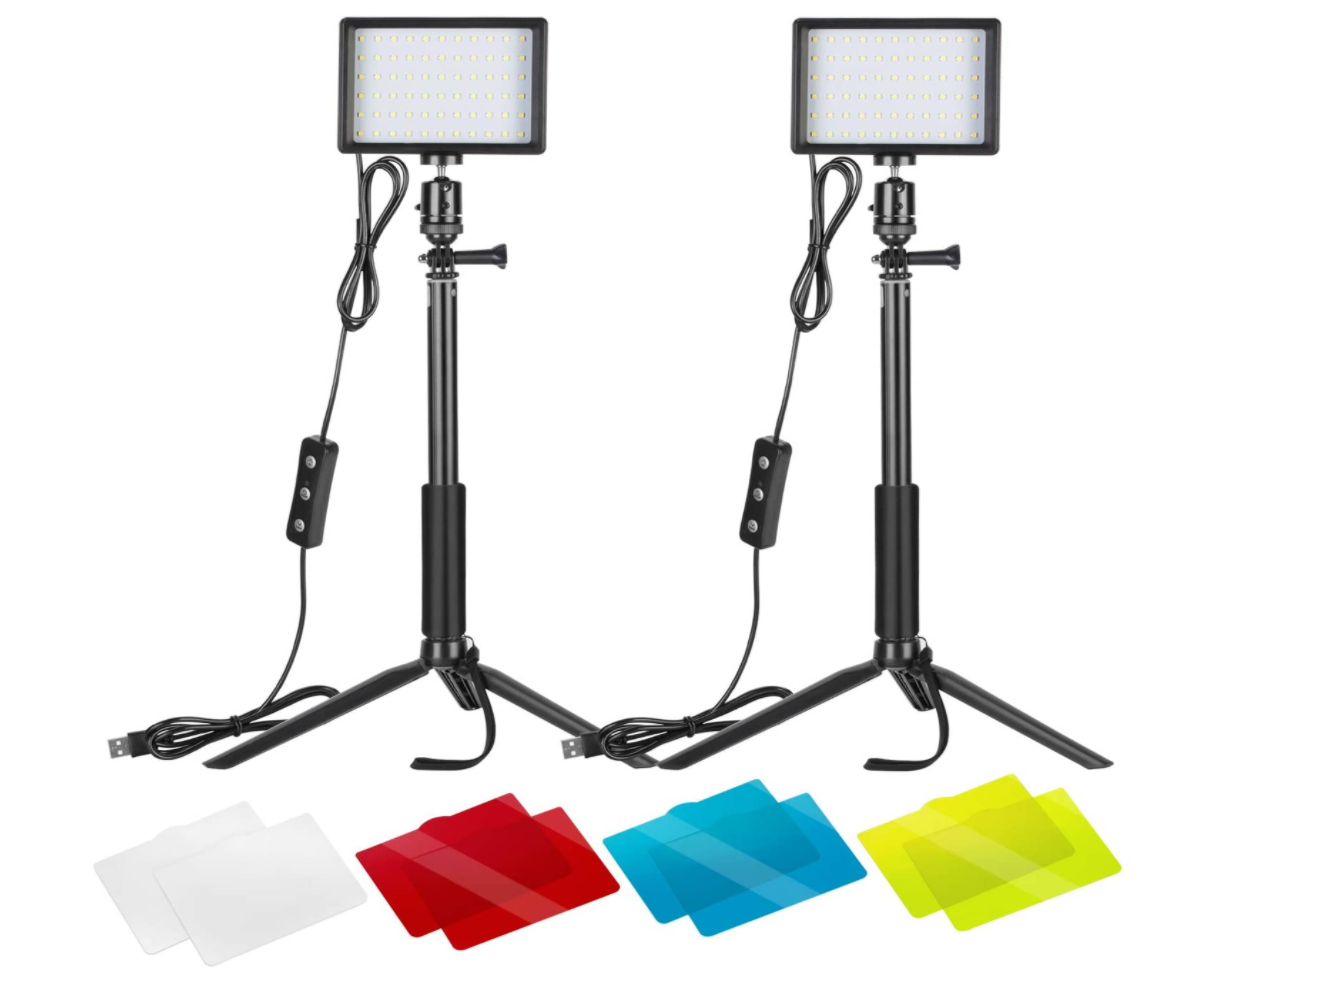 Neewer 2-Pack Dimmable 5600K USB LED Video Light Review